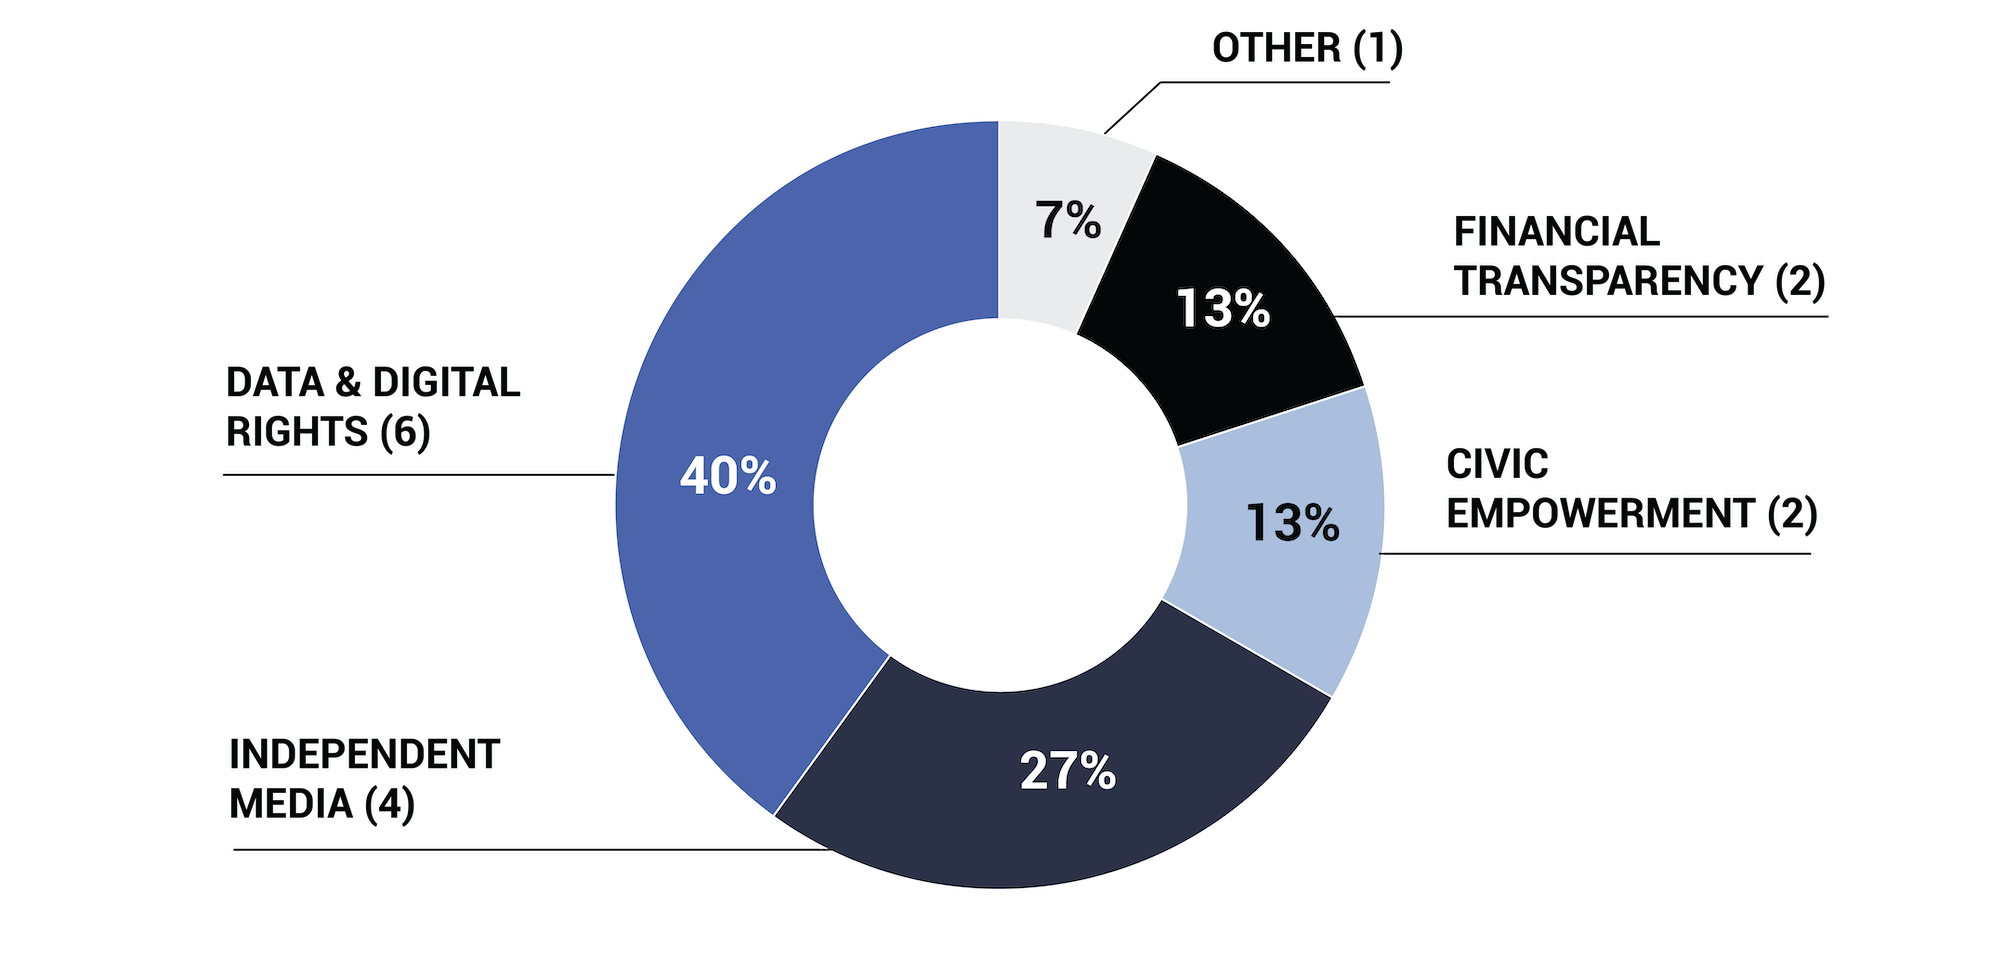 Figure 4 is a donut chart illustrating the number and percent of interviewees based on the issue area focus of their work.